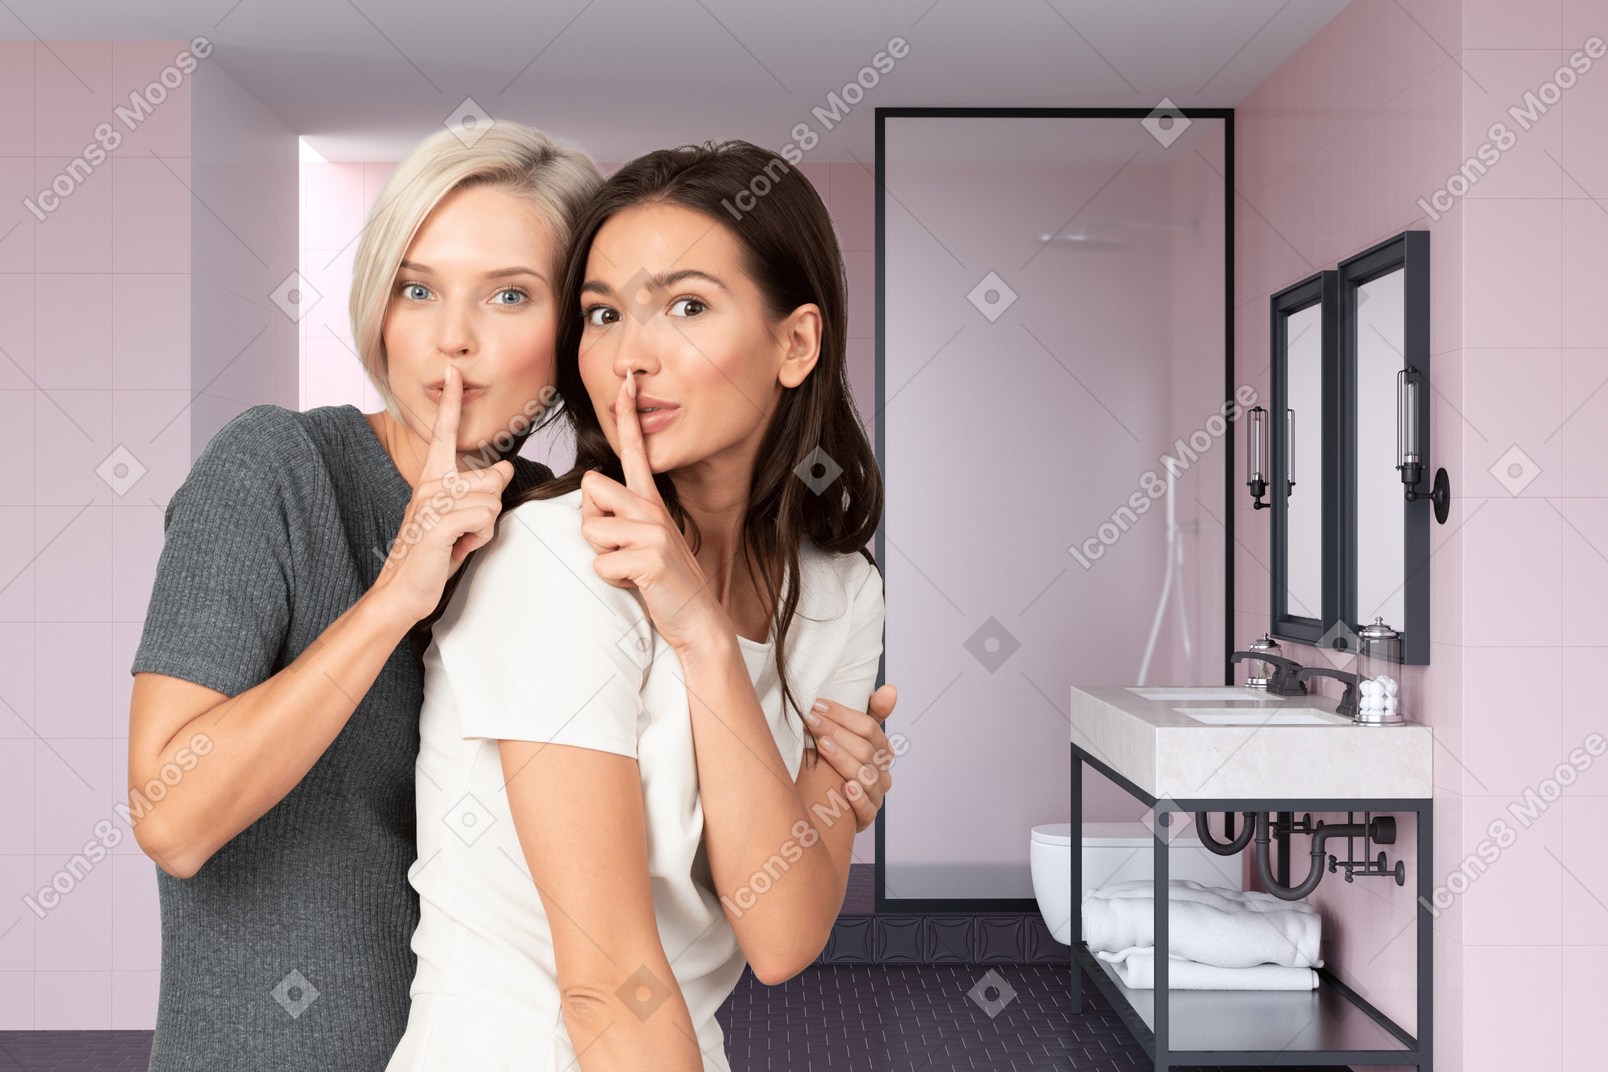 A woman holding a mirror in her bathroom